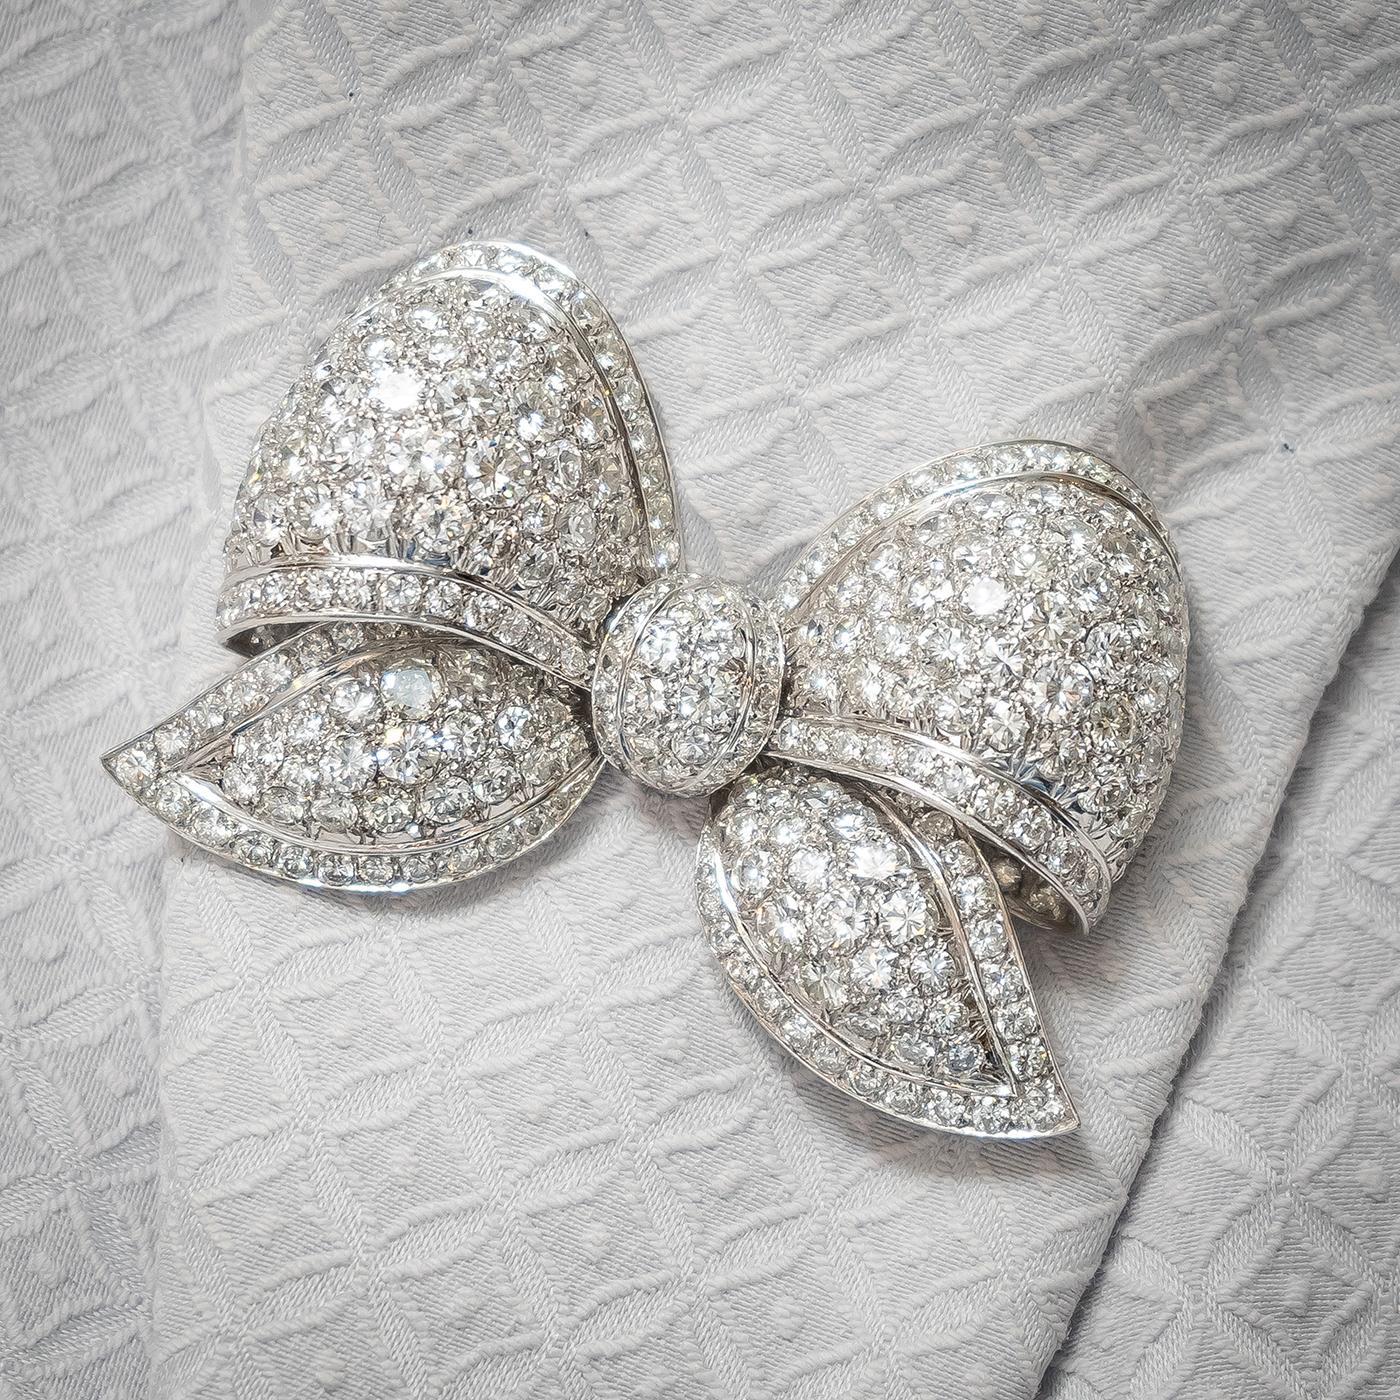 A diamond bow brooch, set with round brilliant cut diamonds weighing an estimated total of 22.00ct, in 18ct white gold. The brooch measures approximately 55 x 40mm.